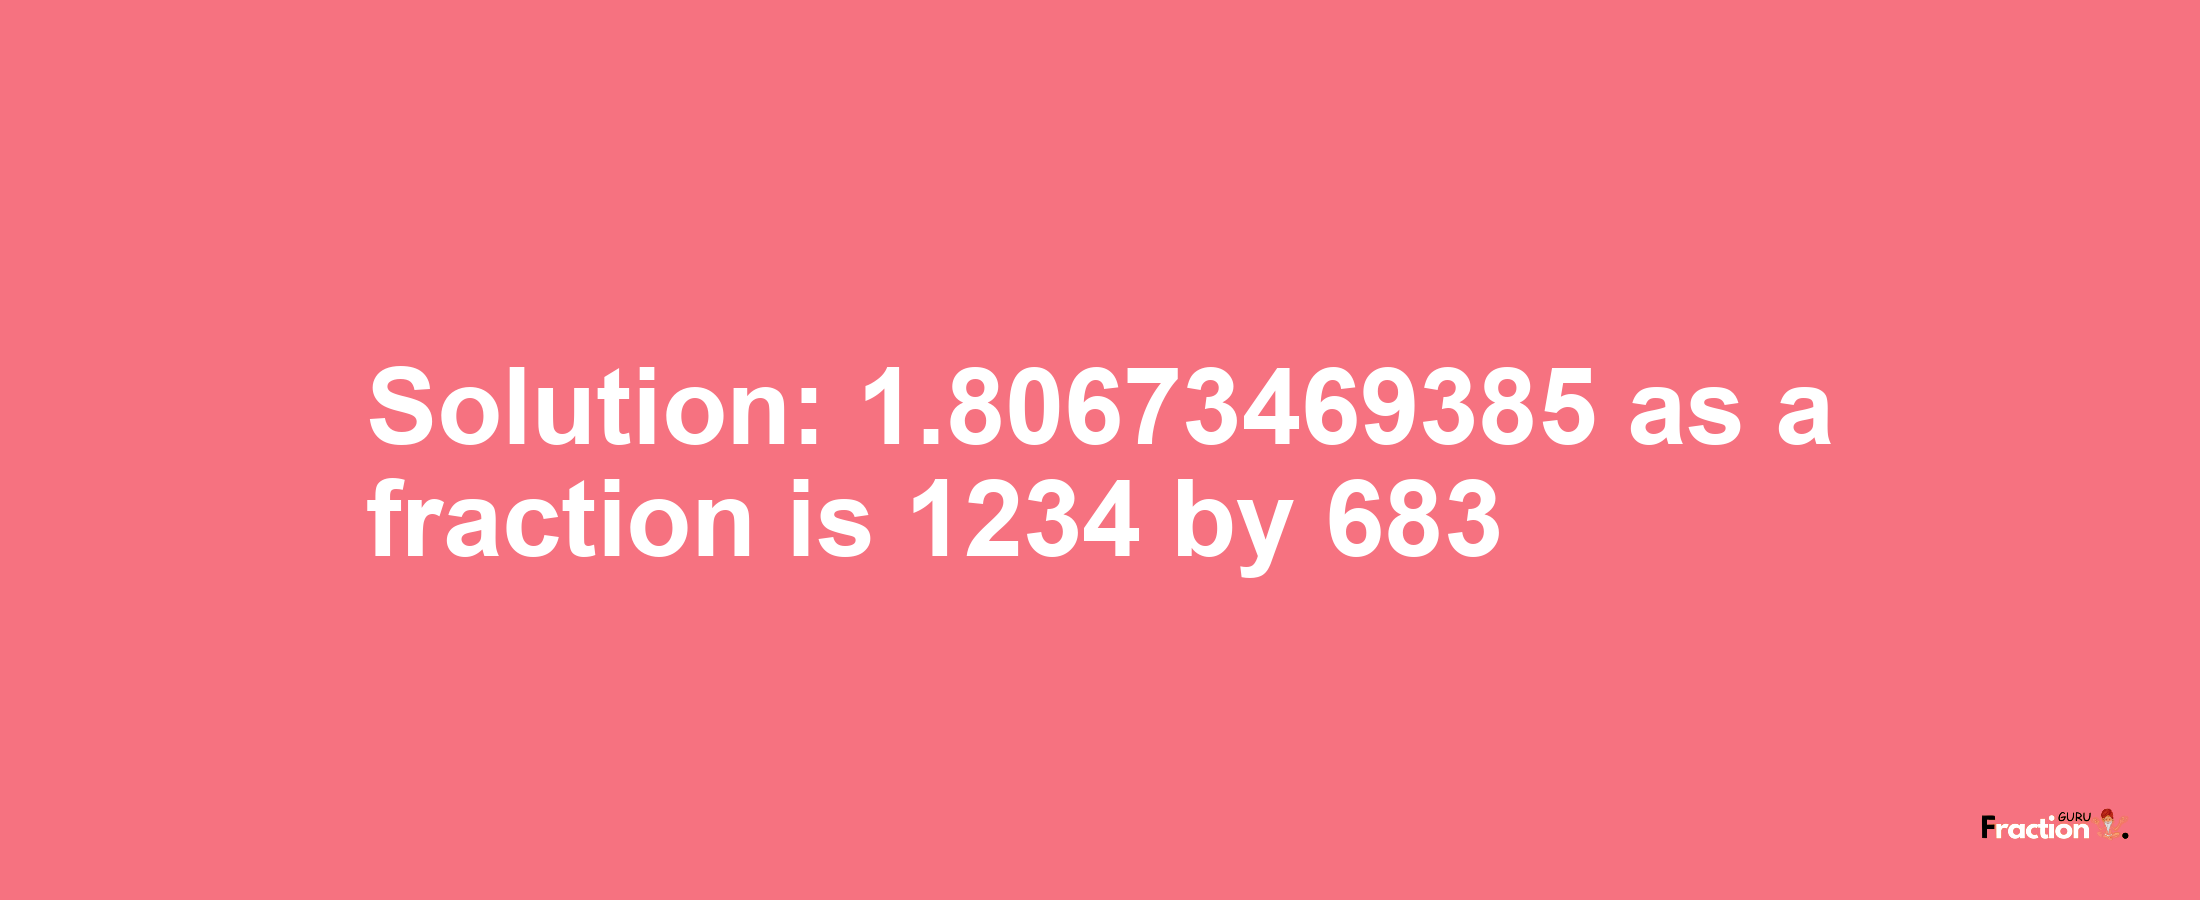 Solution:1.80673469385 as a fraction is 1234/683